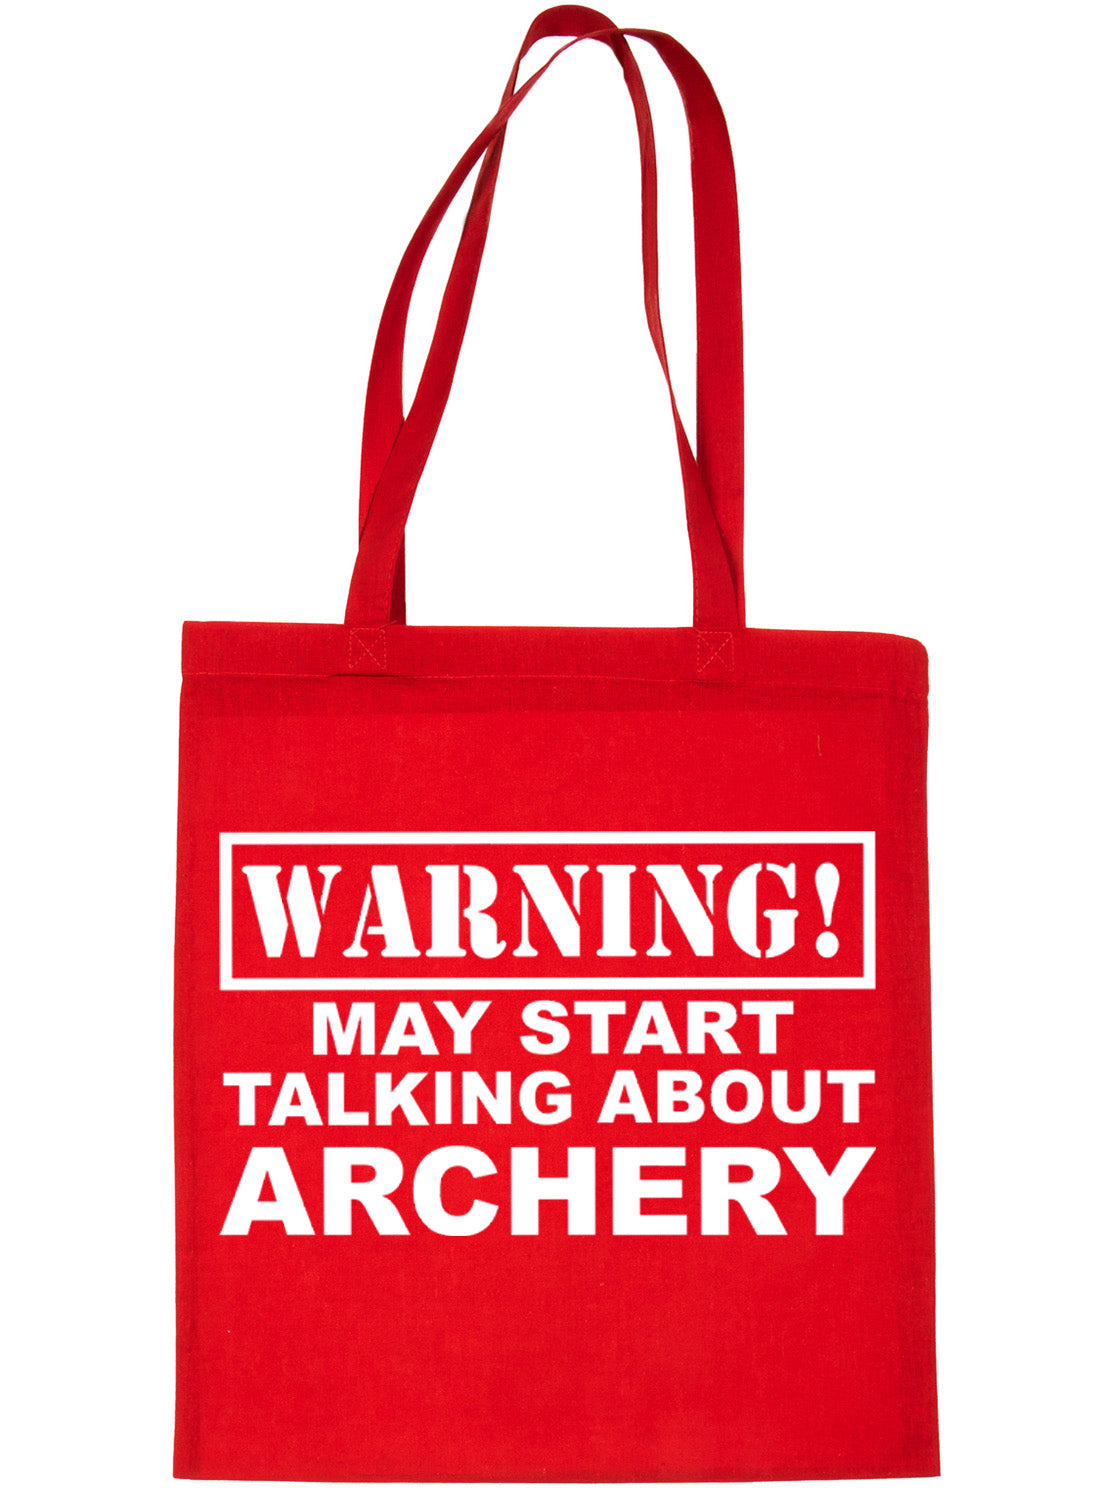 Warning May Talk About Archery Bag For Life Shopping Tote Bag